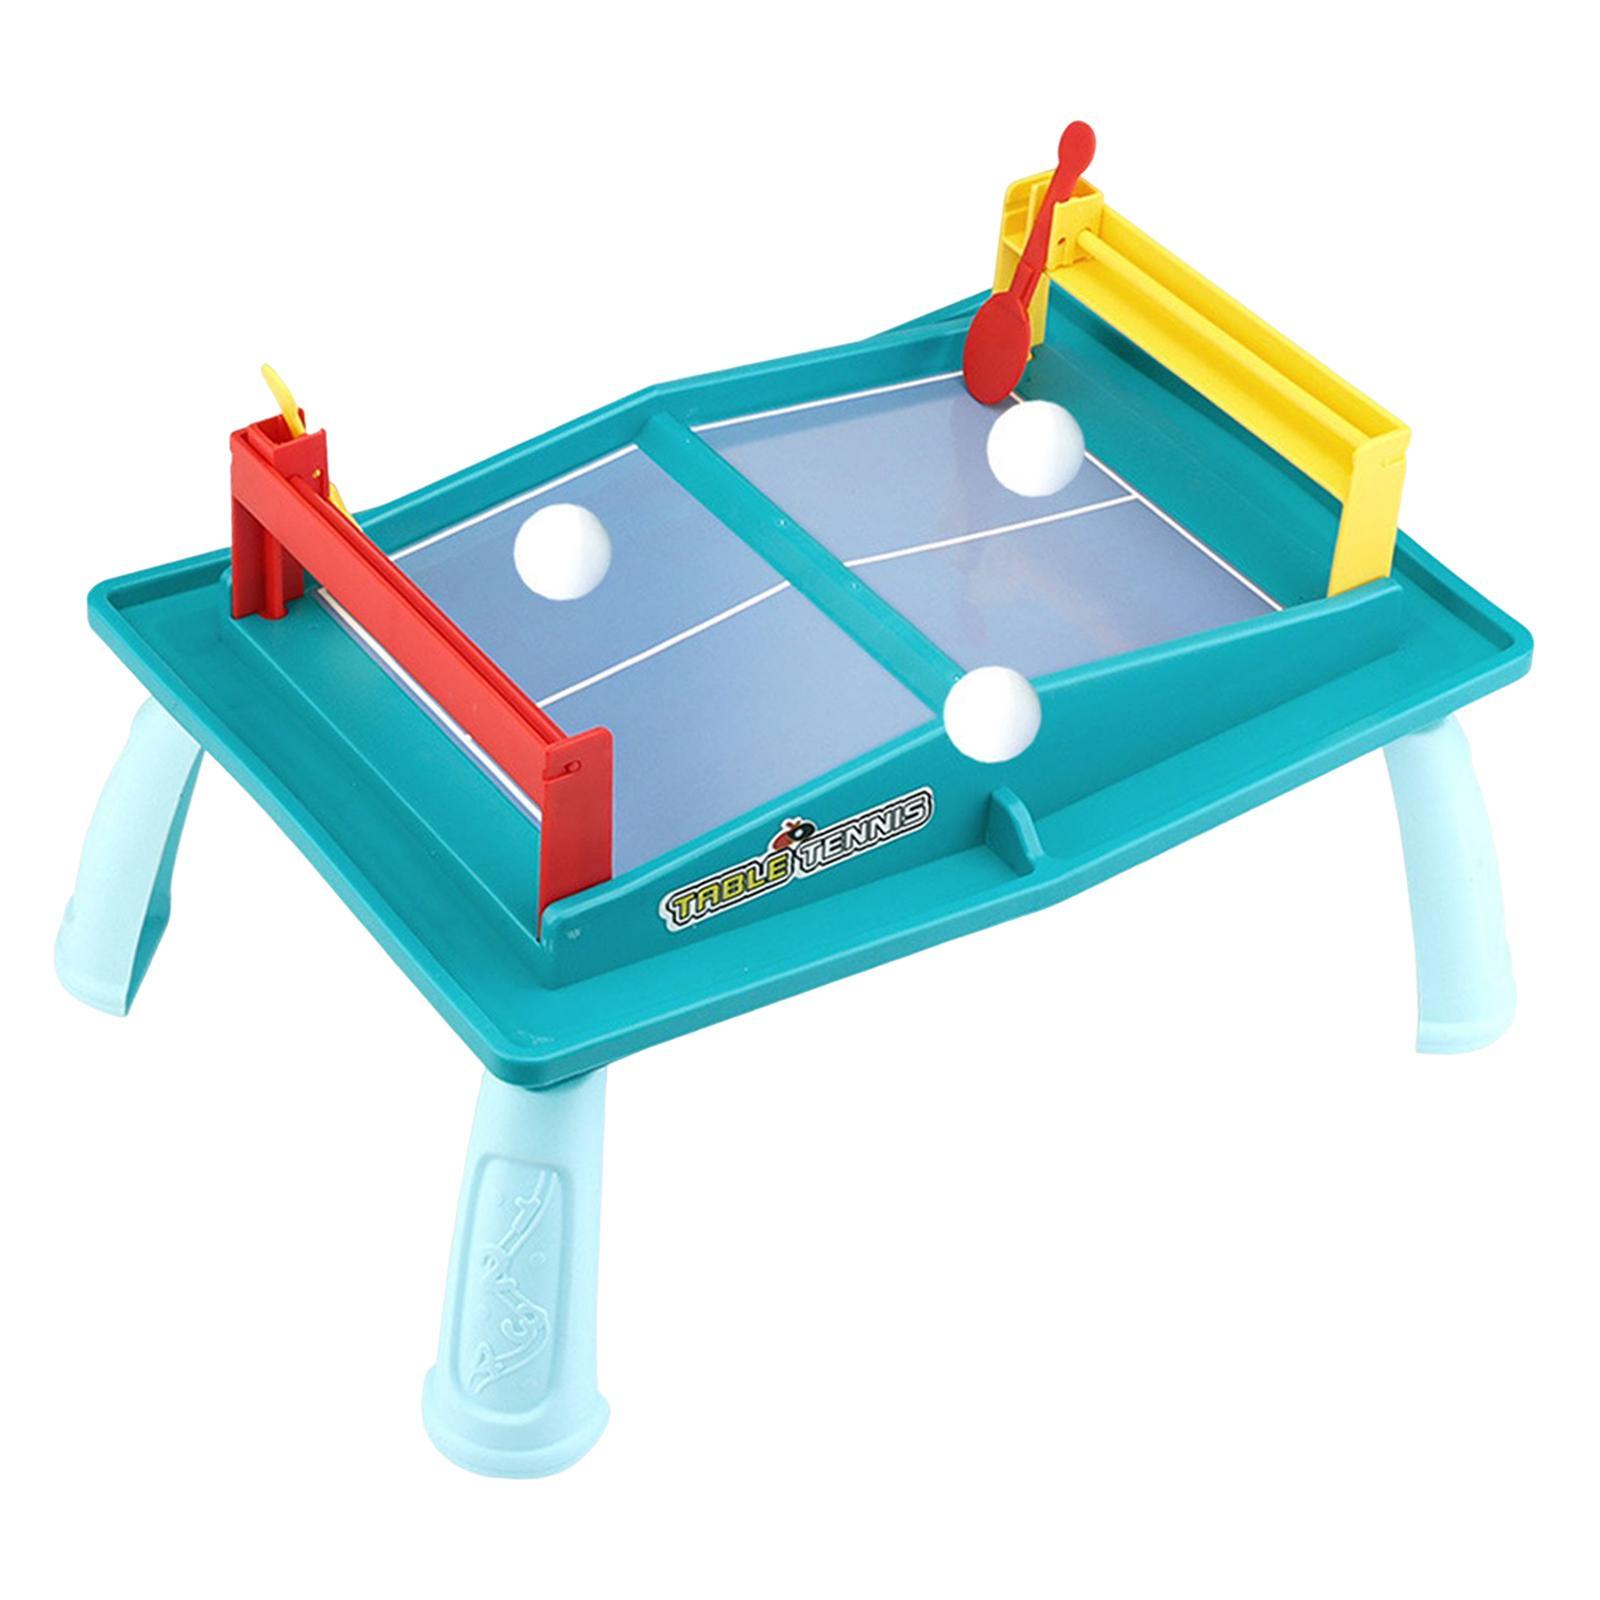 Child Table Games  Pong Detachable Kids Desktop Toy for Gift Birthday Gifts Adult